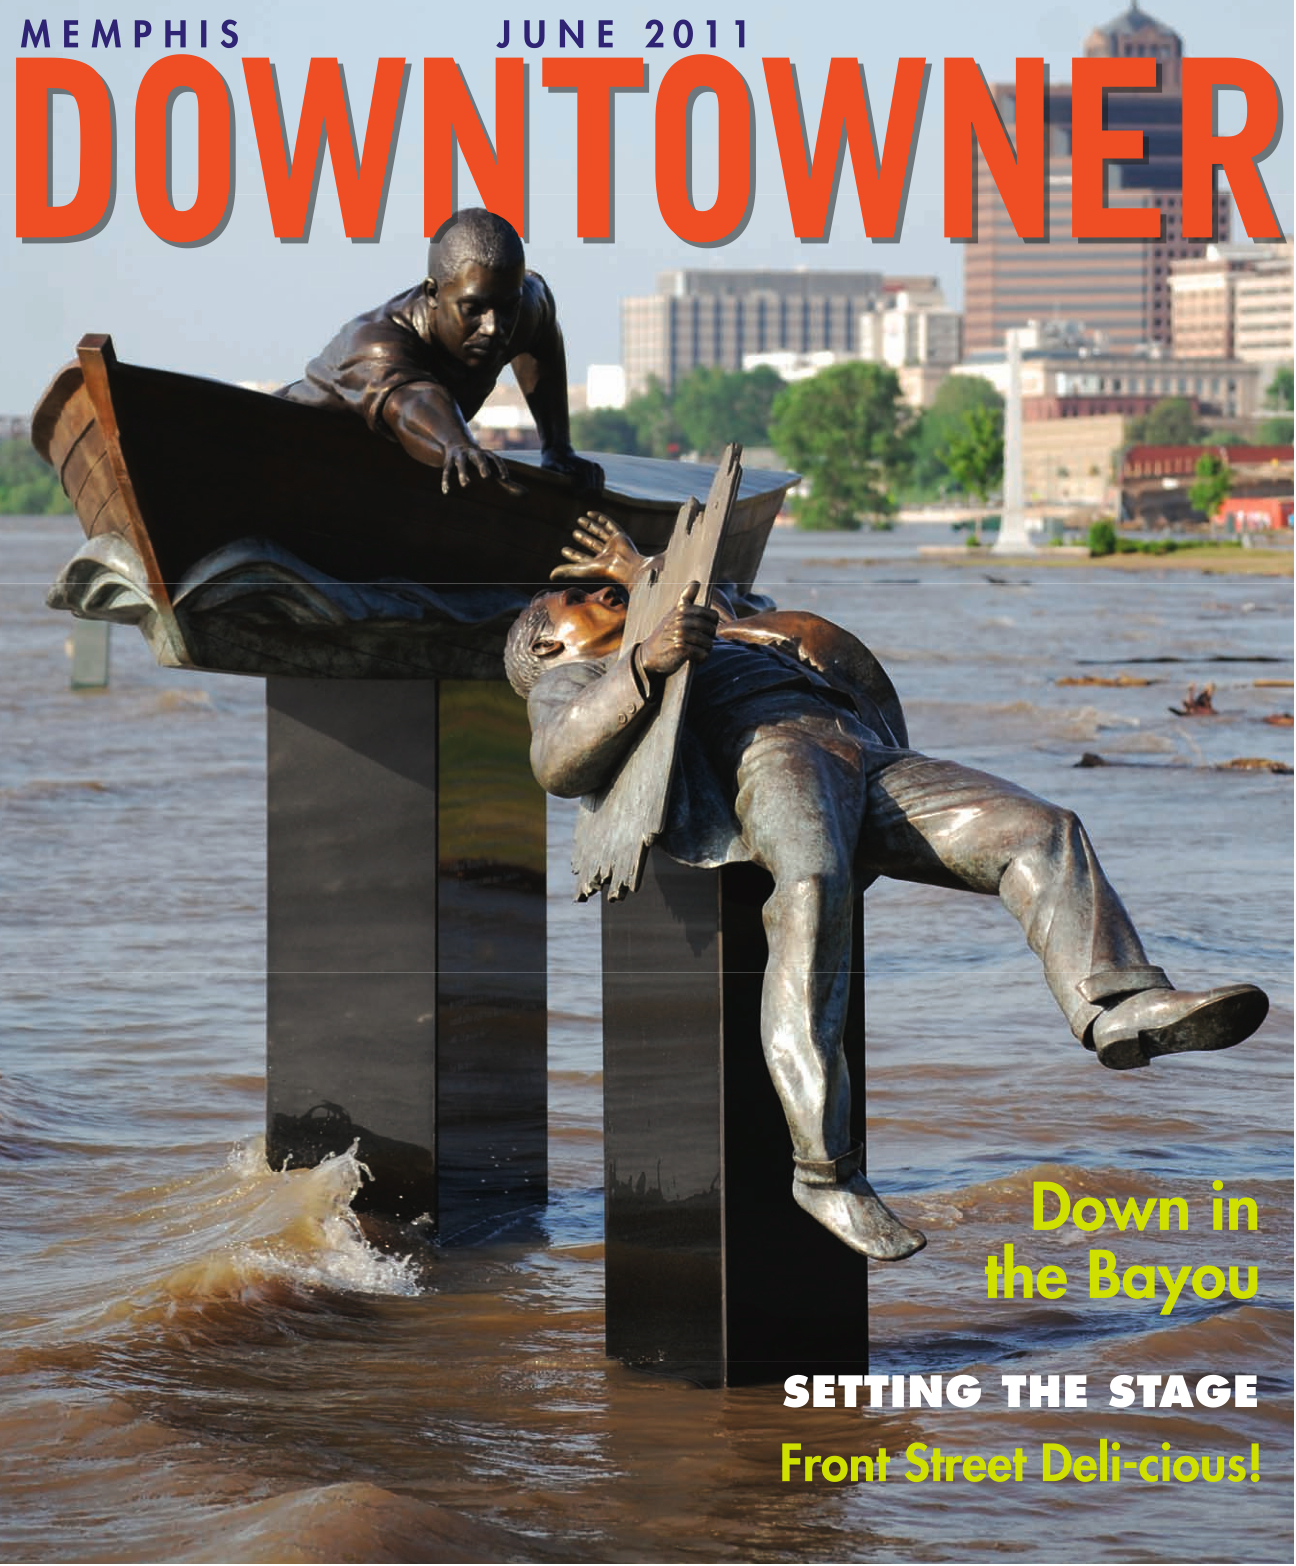  Memphis Downtowner Magazine  Mississippi River Flood  Tom Lee statue, Tom Lee Park  Publication design by Chuck Mitchell  Photograph by Chuck Mitchell 